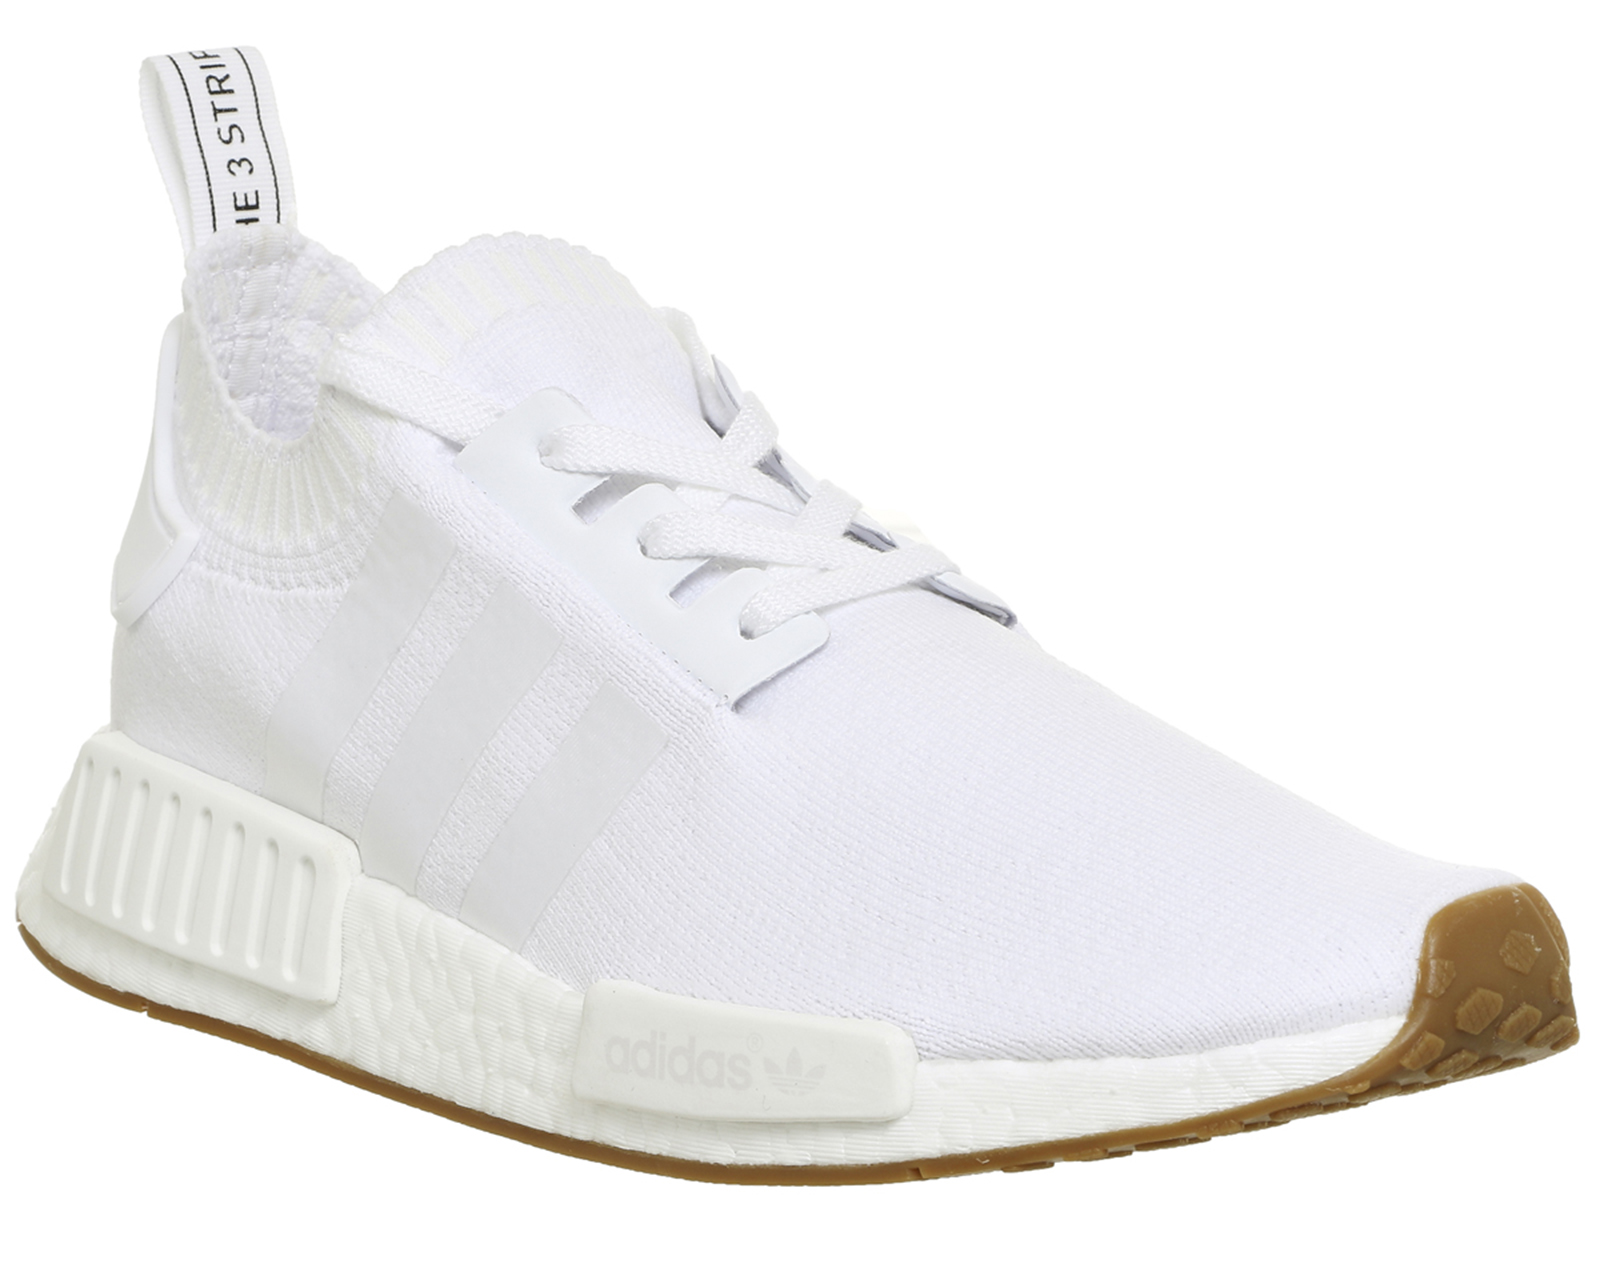 adidas nmd r1 in white